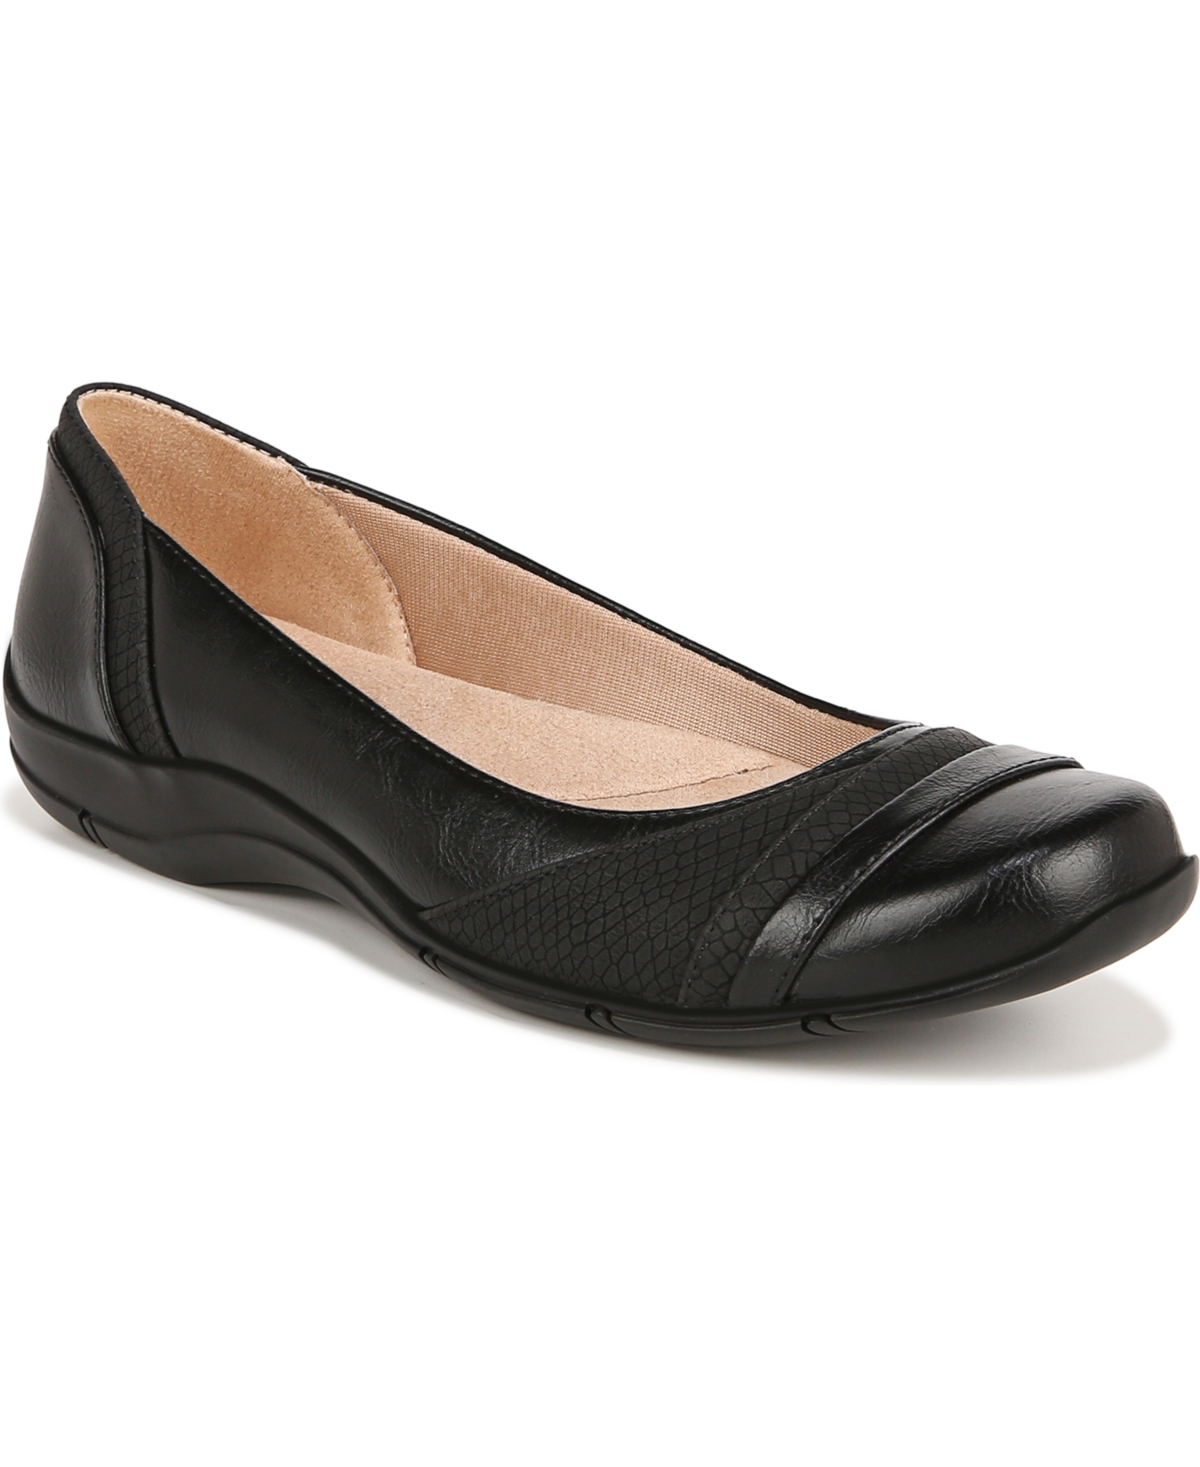 Dig Flats - Black Faux Leather